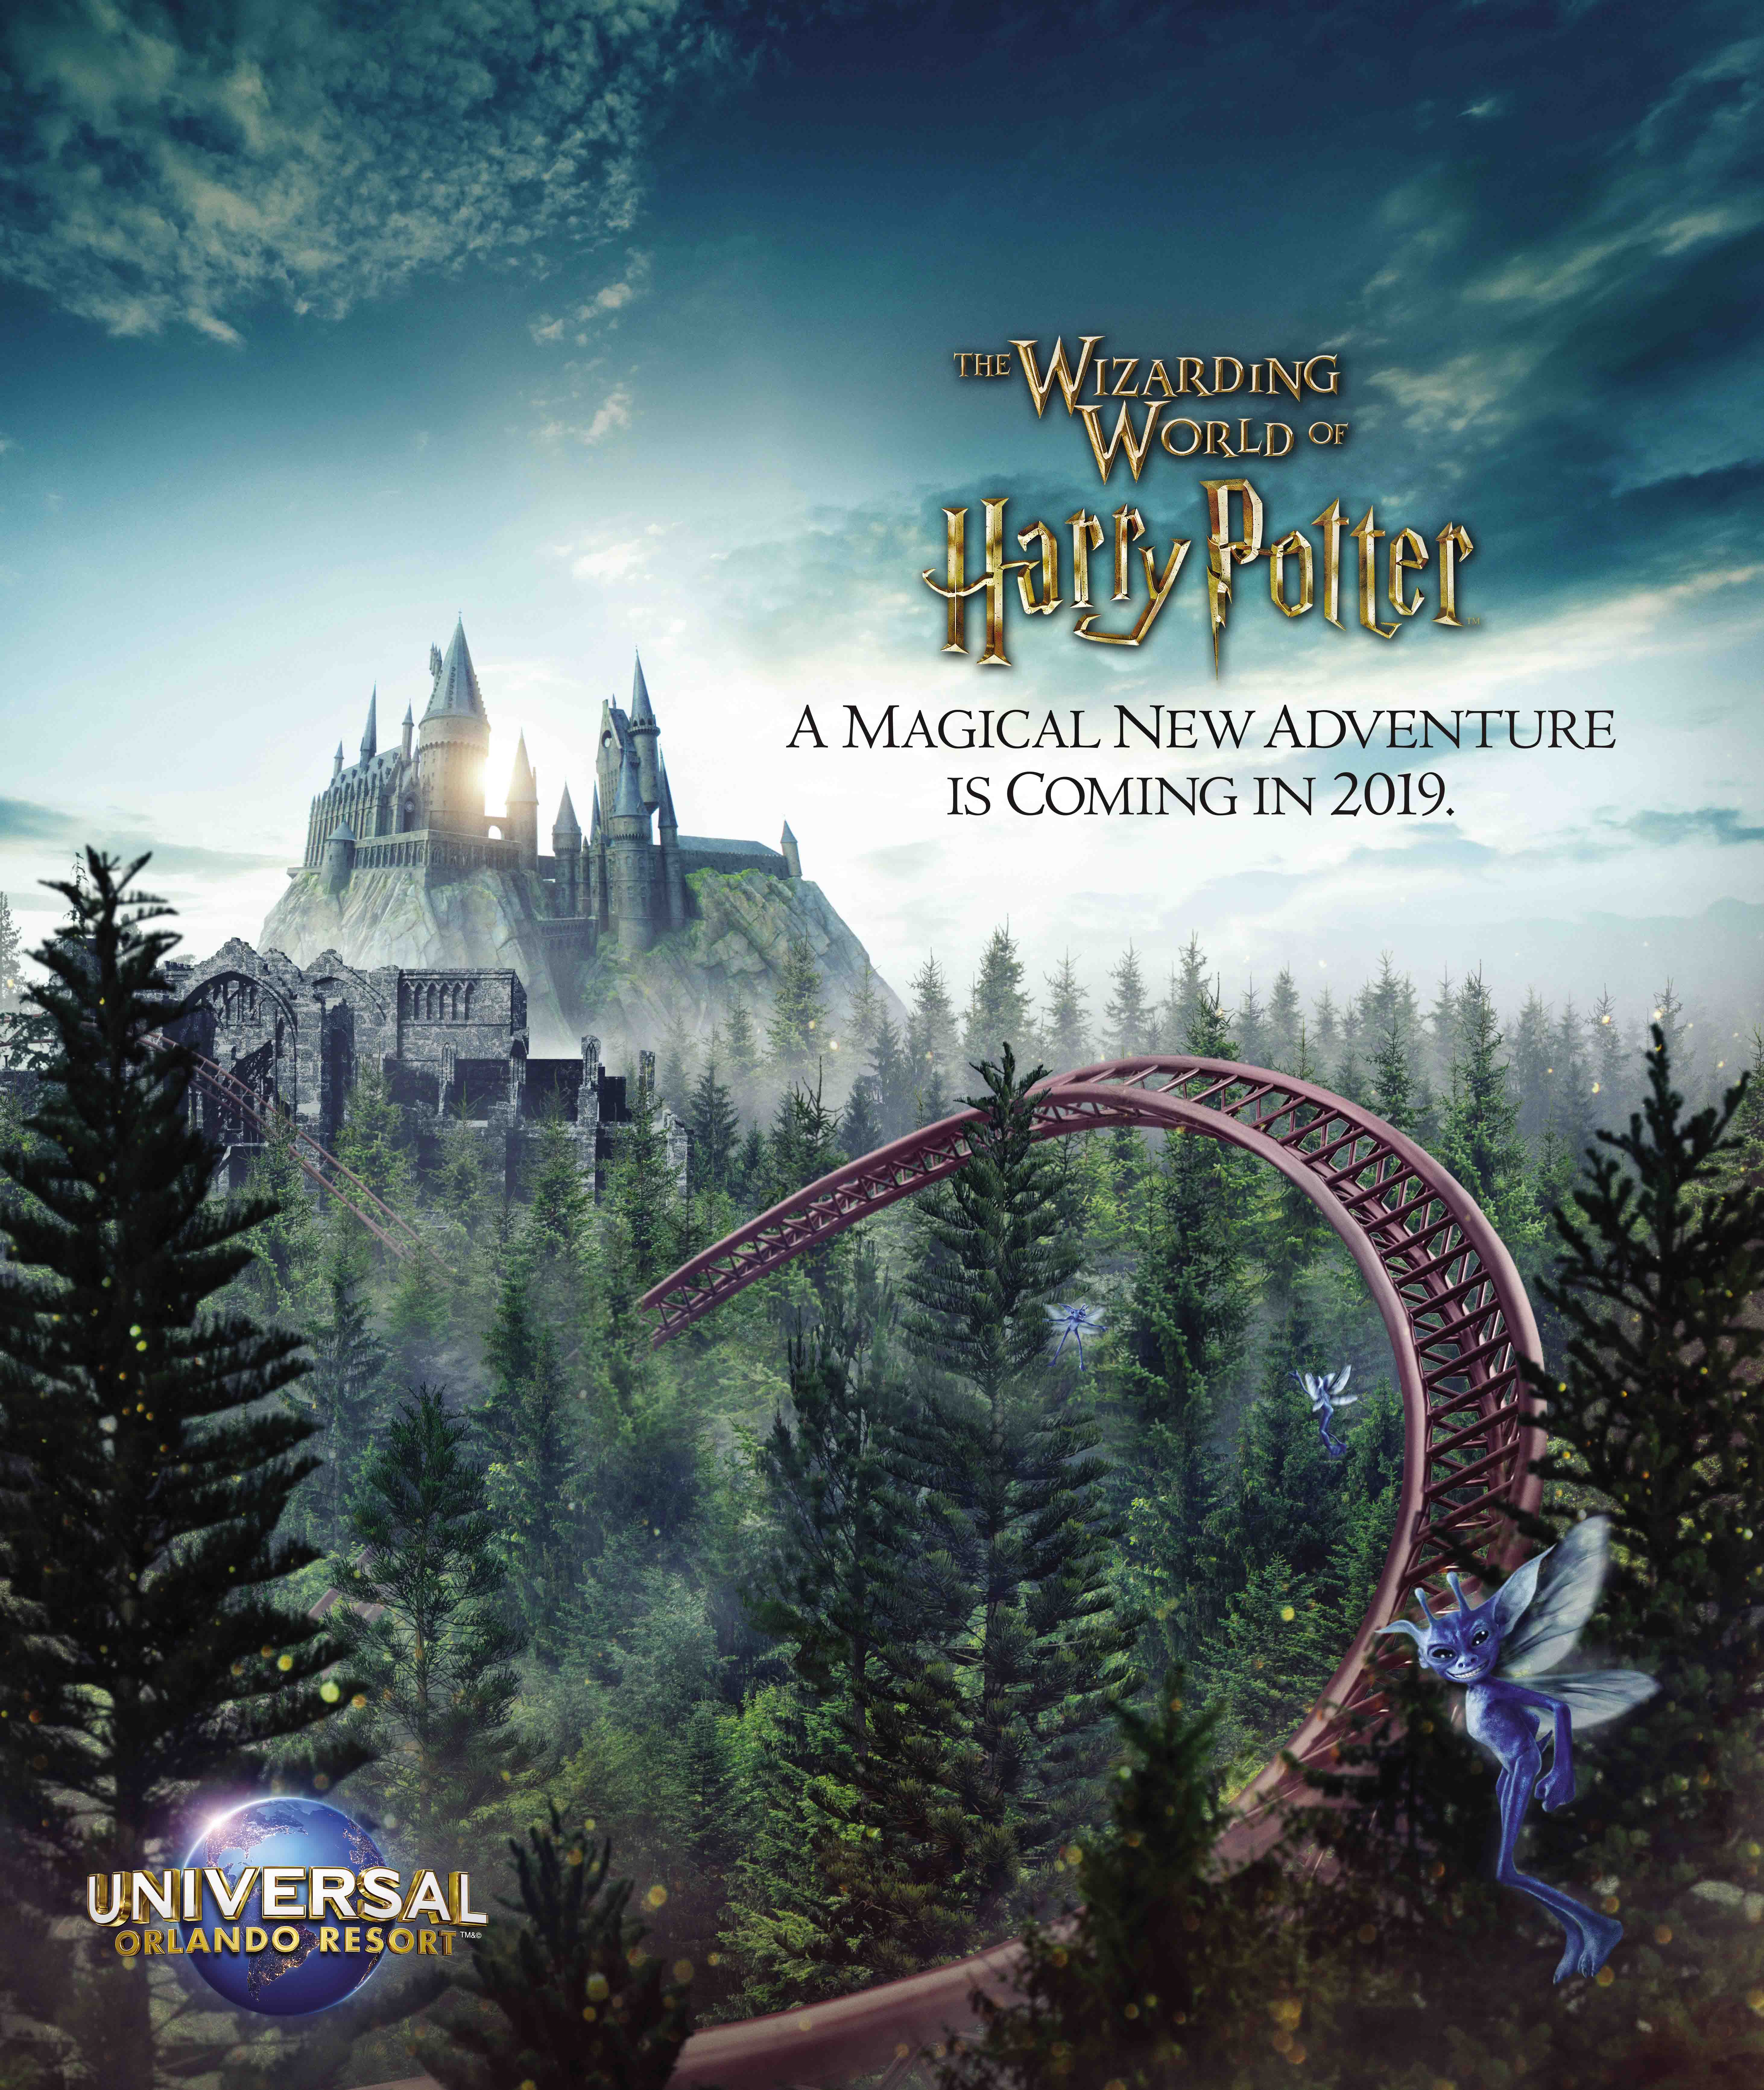 First look at Universal Orlando's new Wizarding World of Harry Potter ride